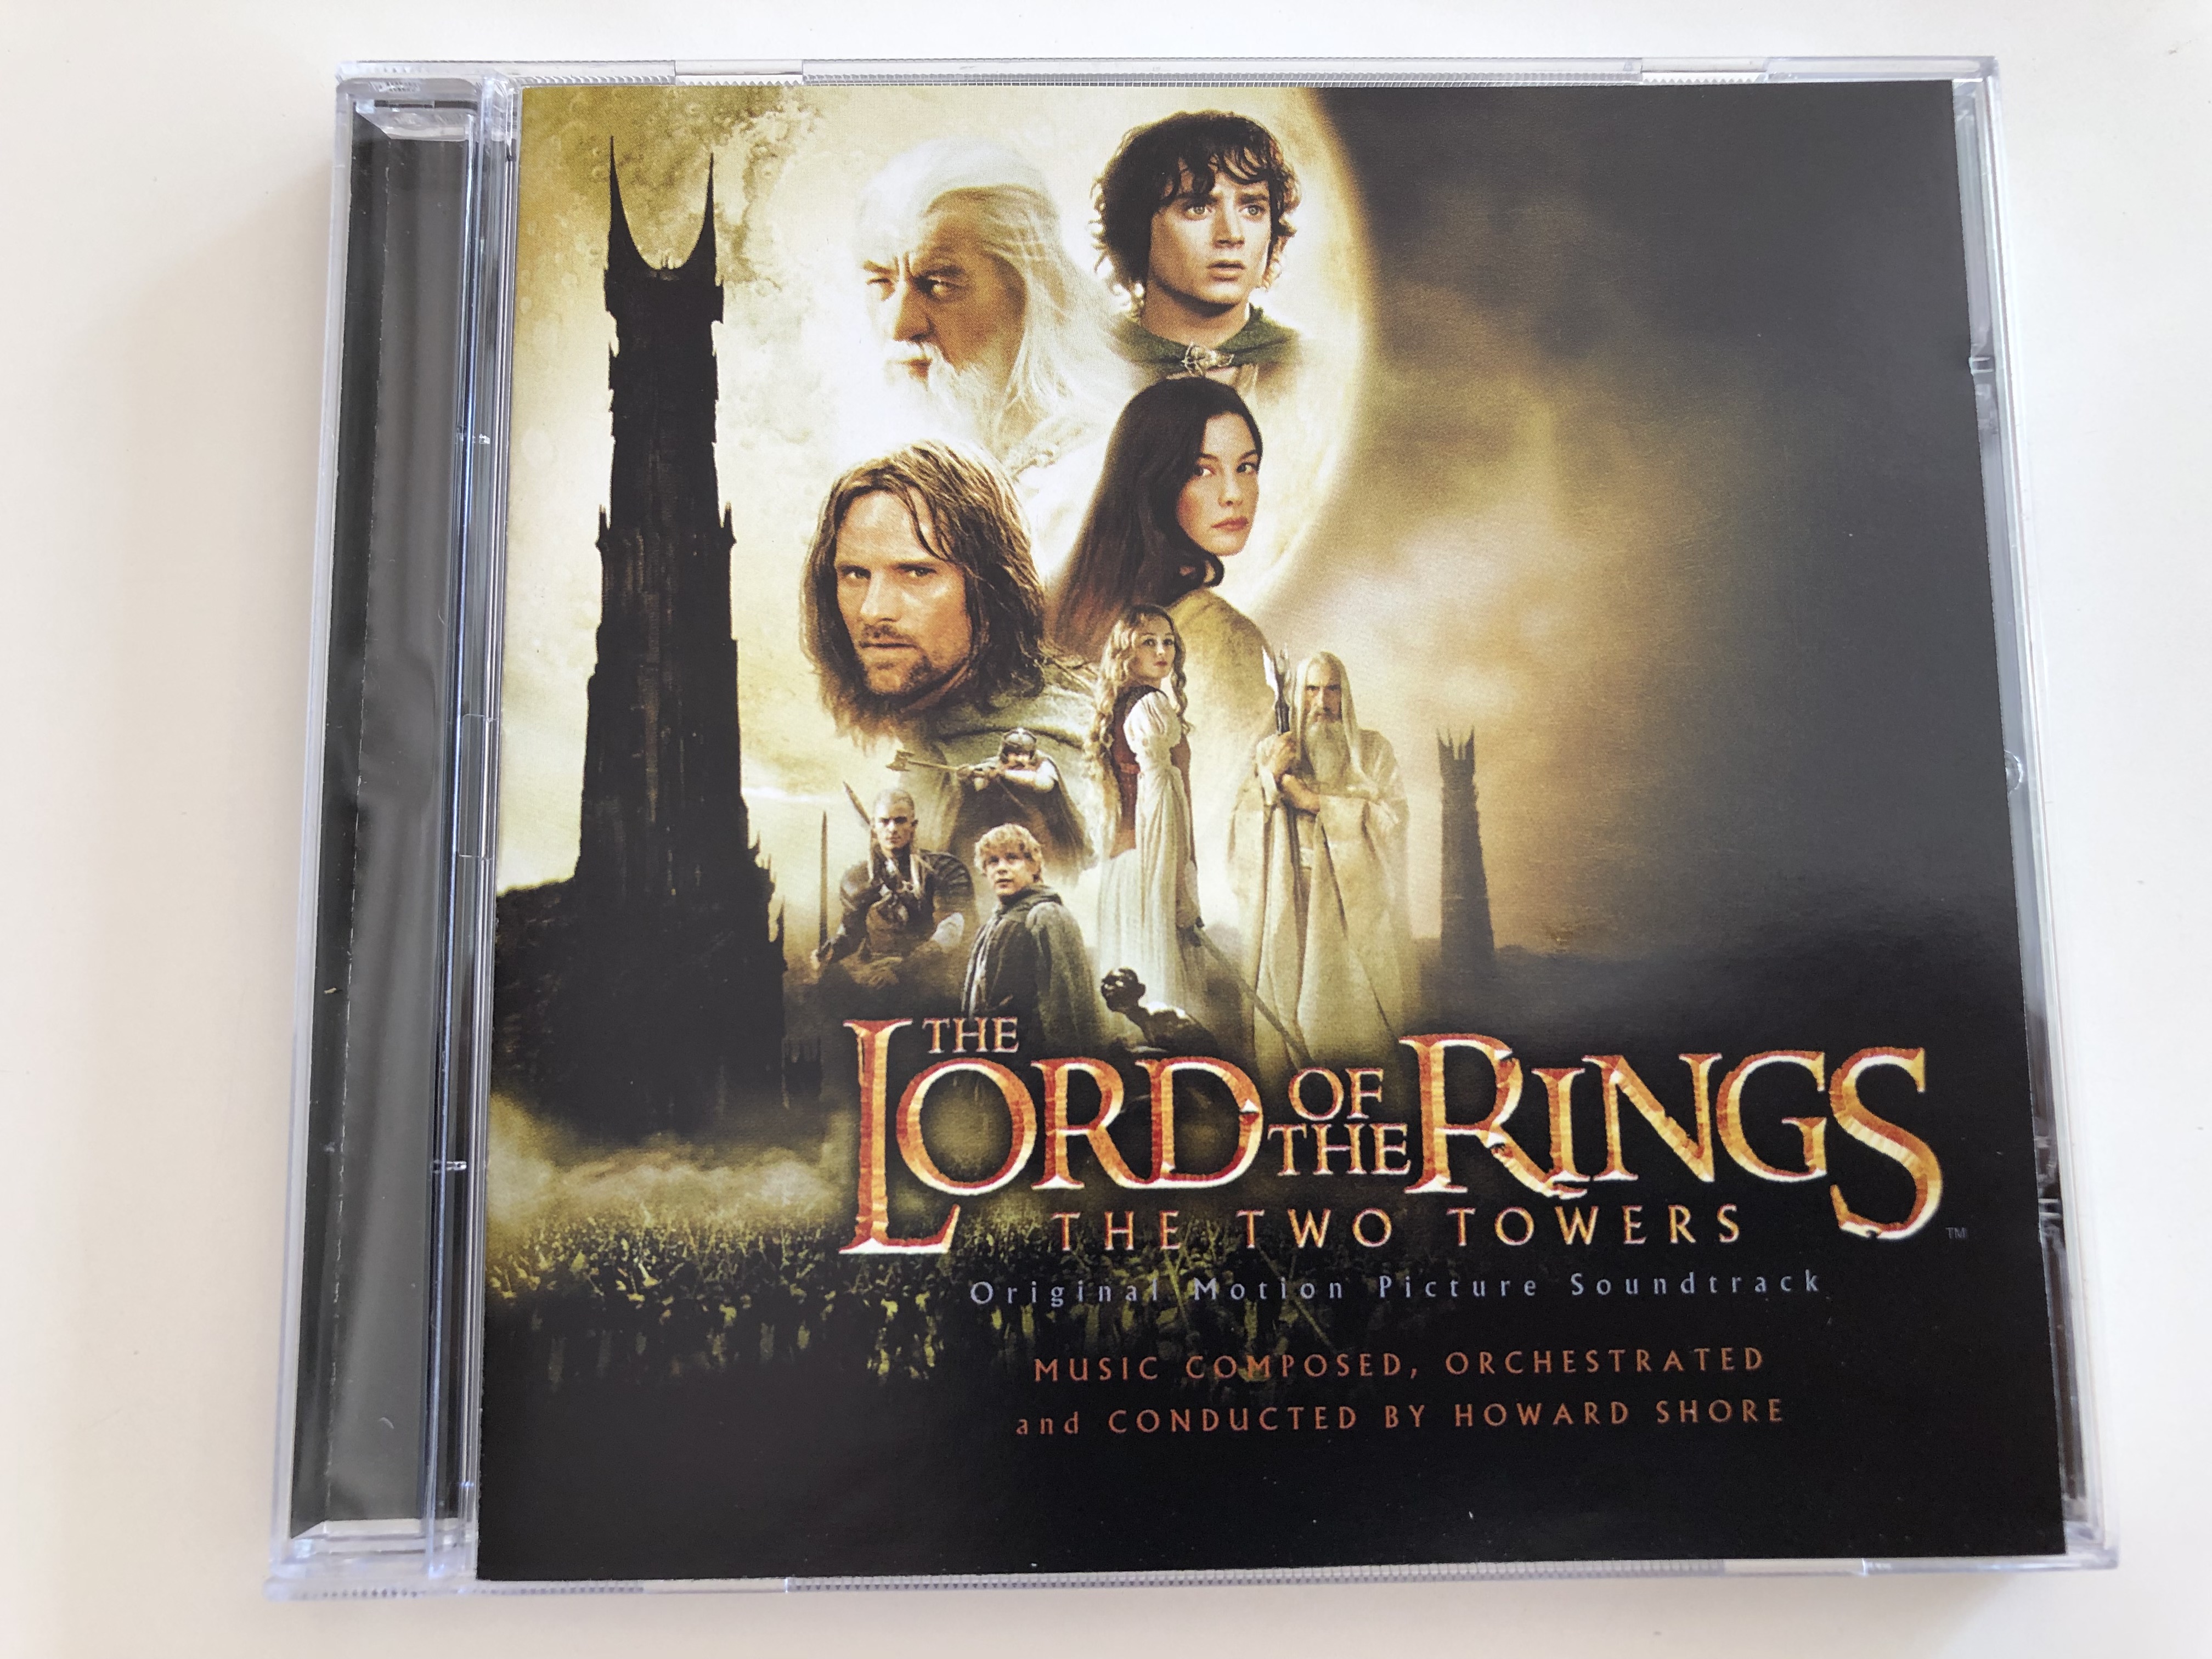 the-lord-of-the-rings-the-two-towers-original-motion-picture-soundtrack-music-composed-orchestrated-and-conducted-by-howard-shore-audio-cd-2002-warner-music-1-.jpg